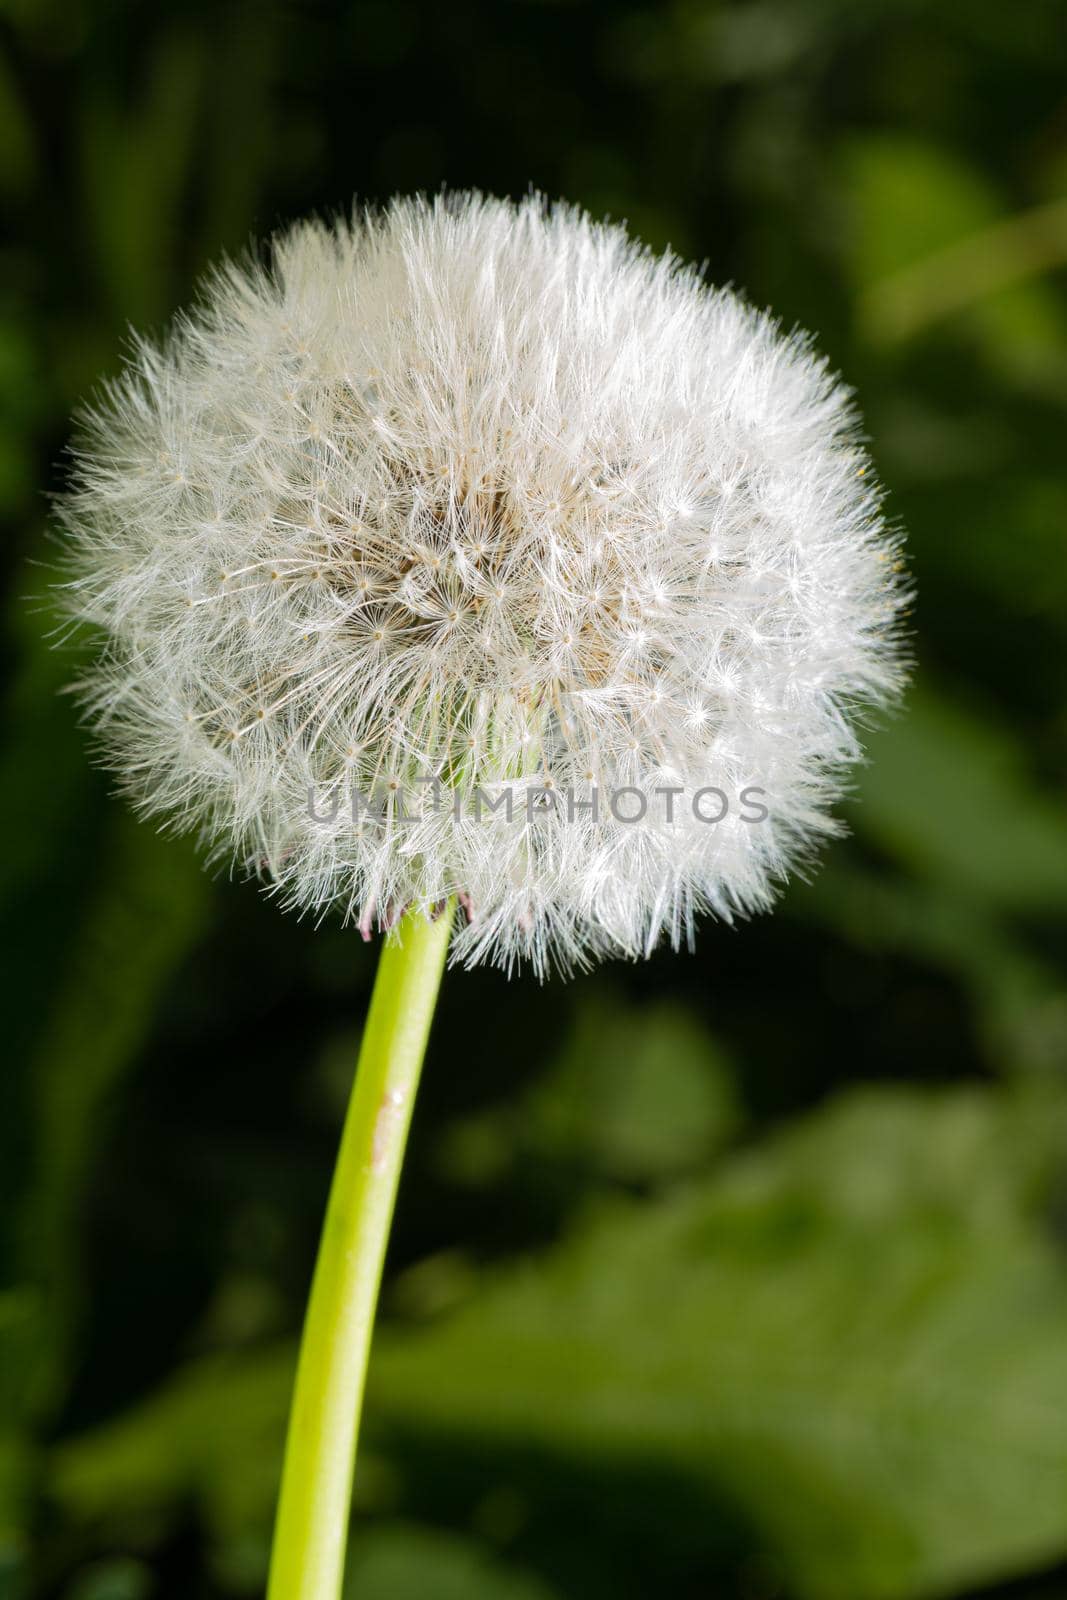 Fluffy flower head of dandelion on green background. Close-up view